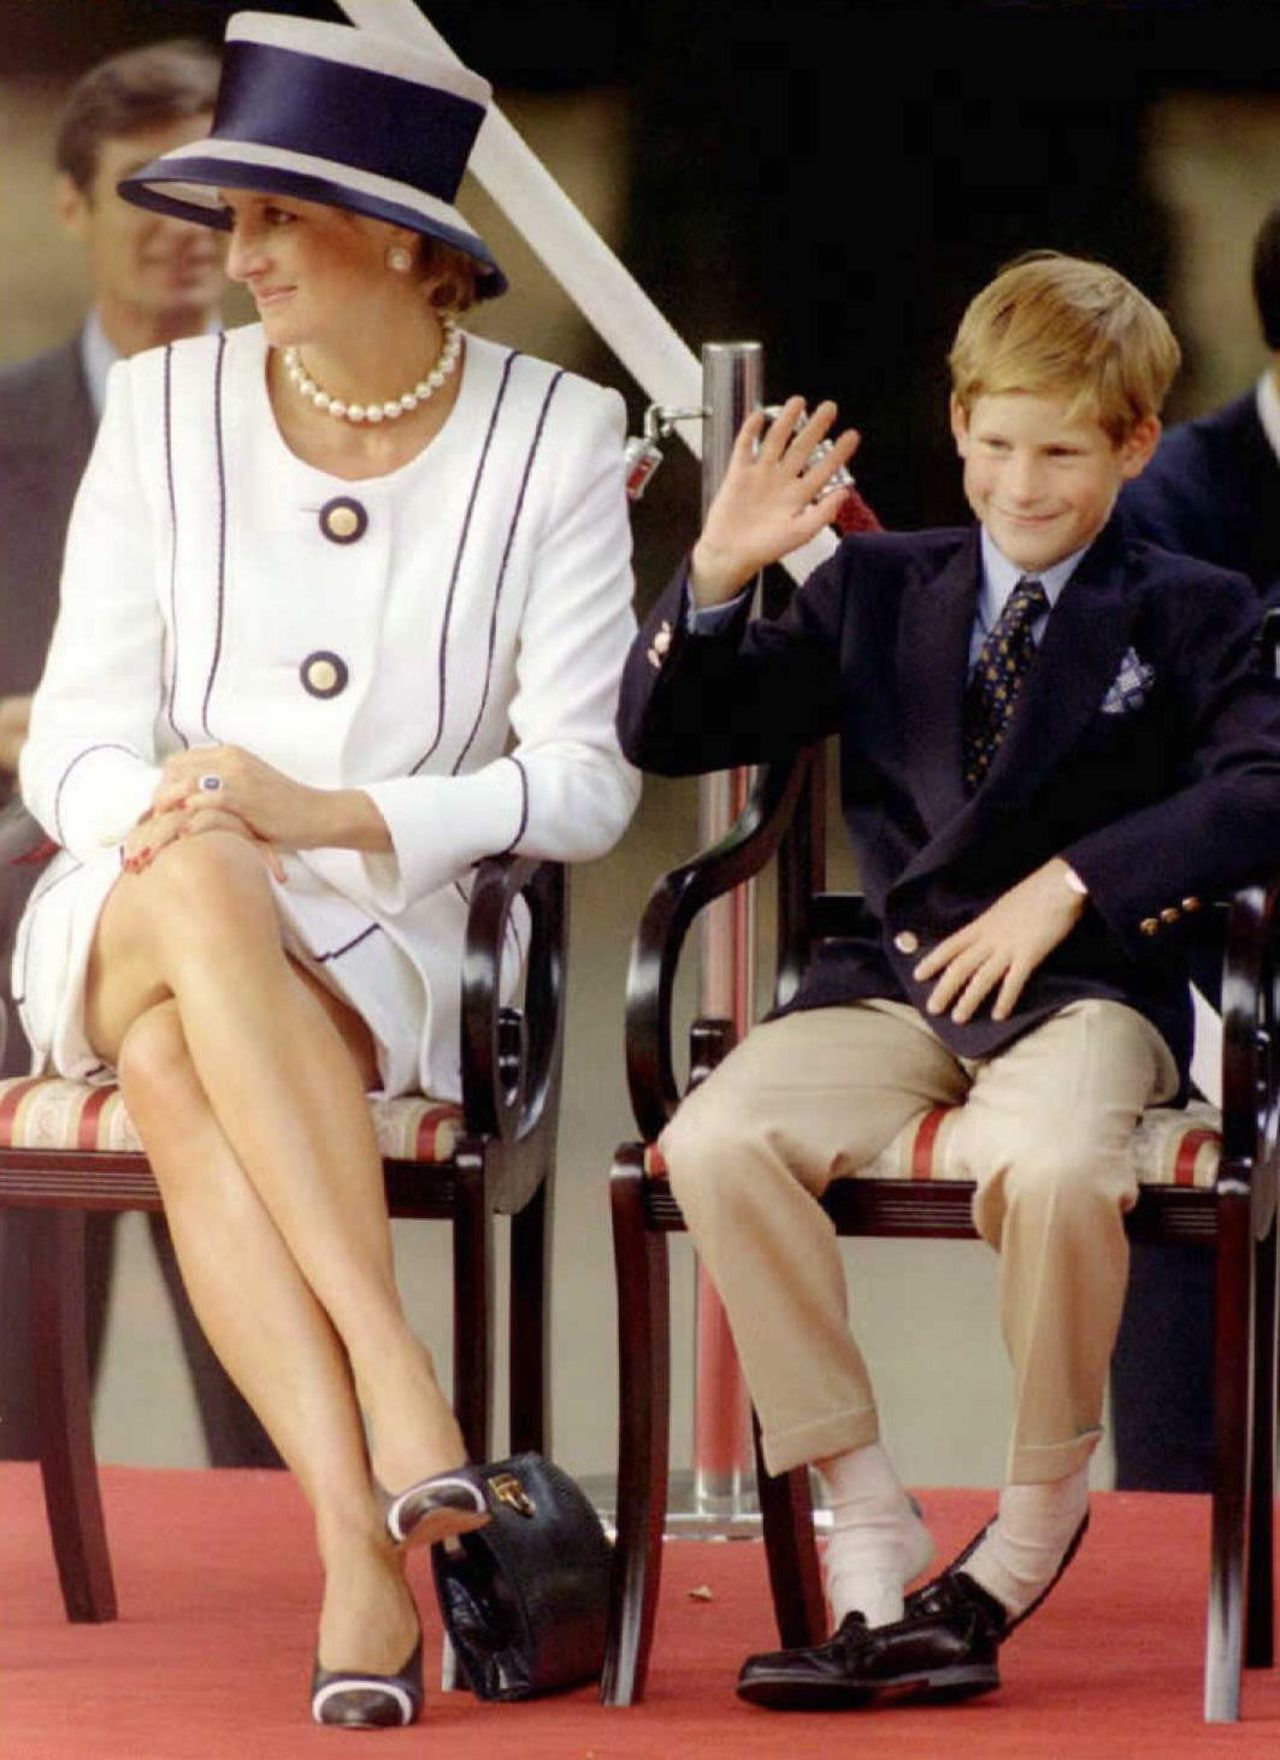 She had also auctioned her clothes during her lifetime in support of AIDS and cancer charities. Here she is pictured with her son Prince Harry during  the commemorations of VJ Day.